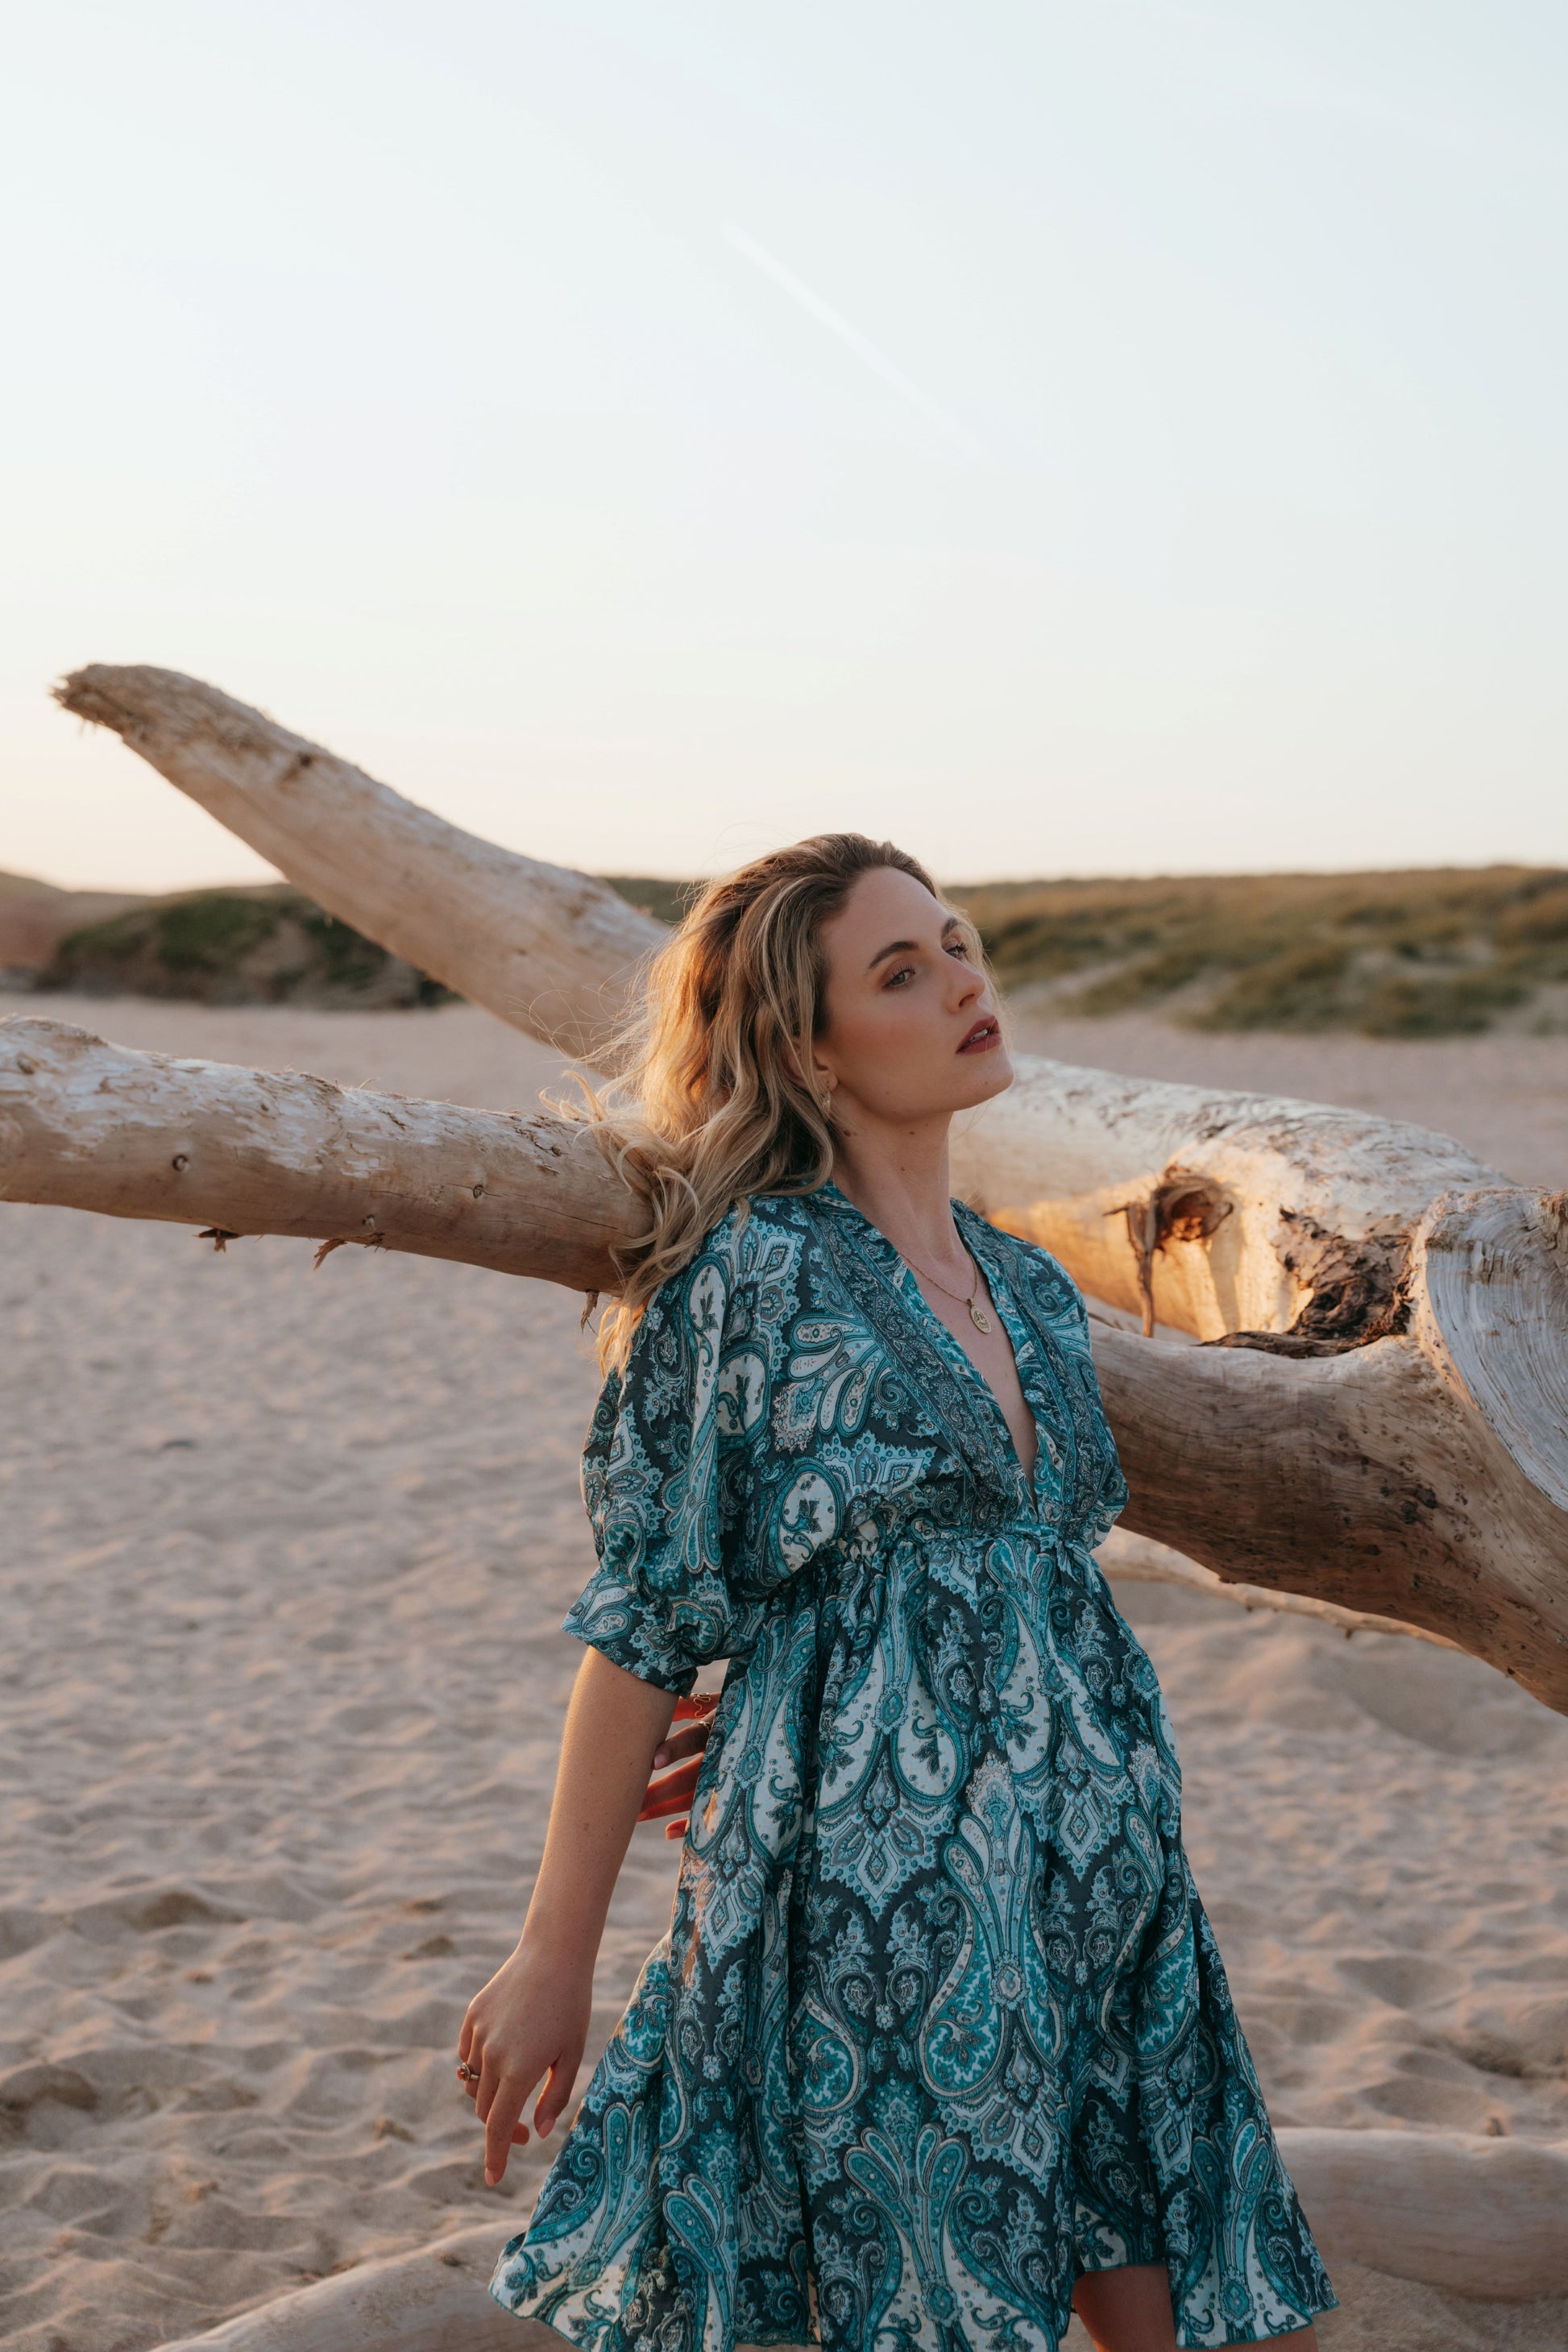 Shop the Sami dress from Anetos London's range of timeless and relaxed pieces.